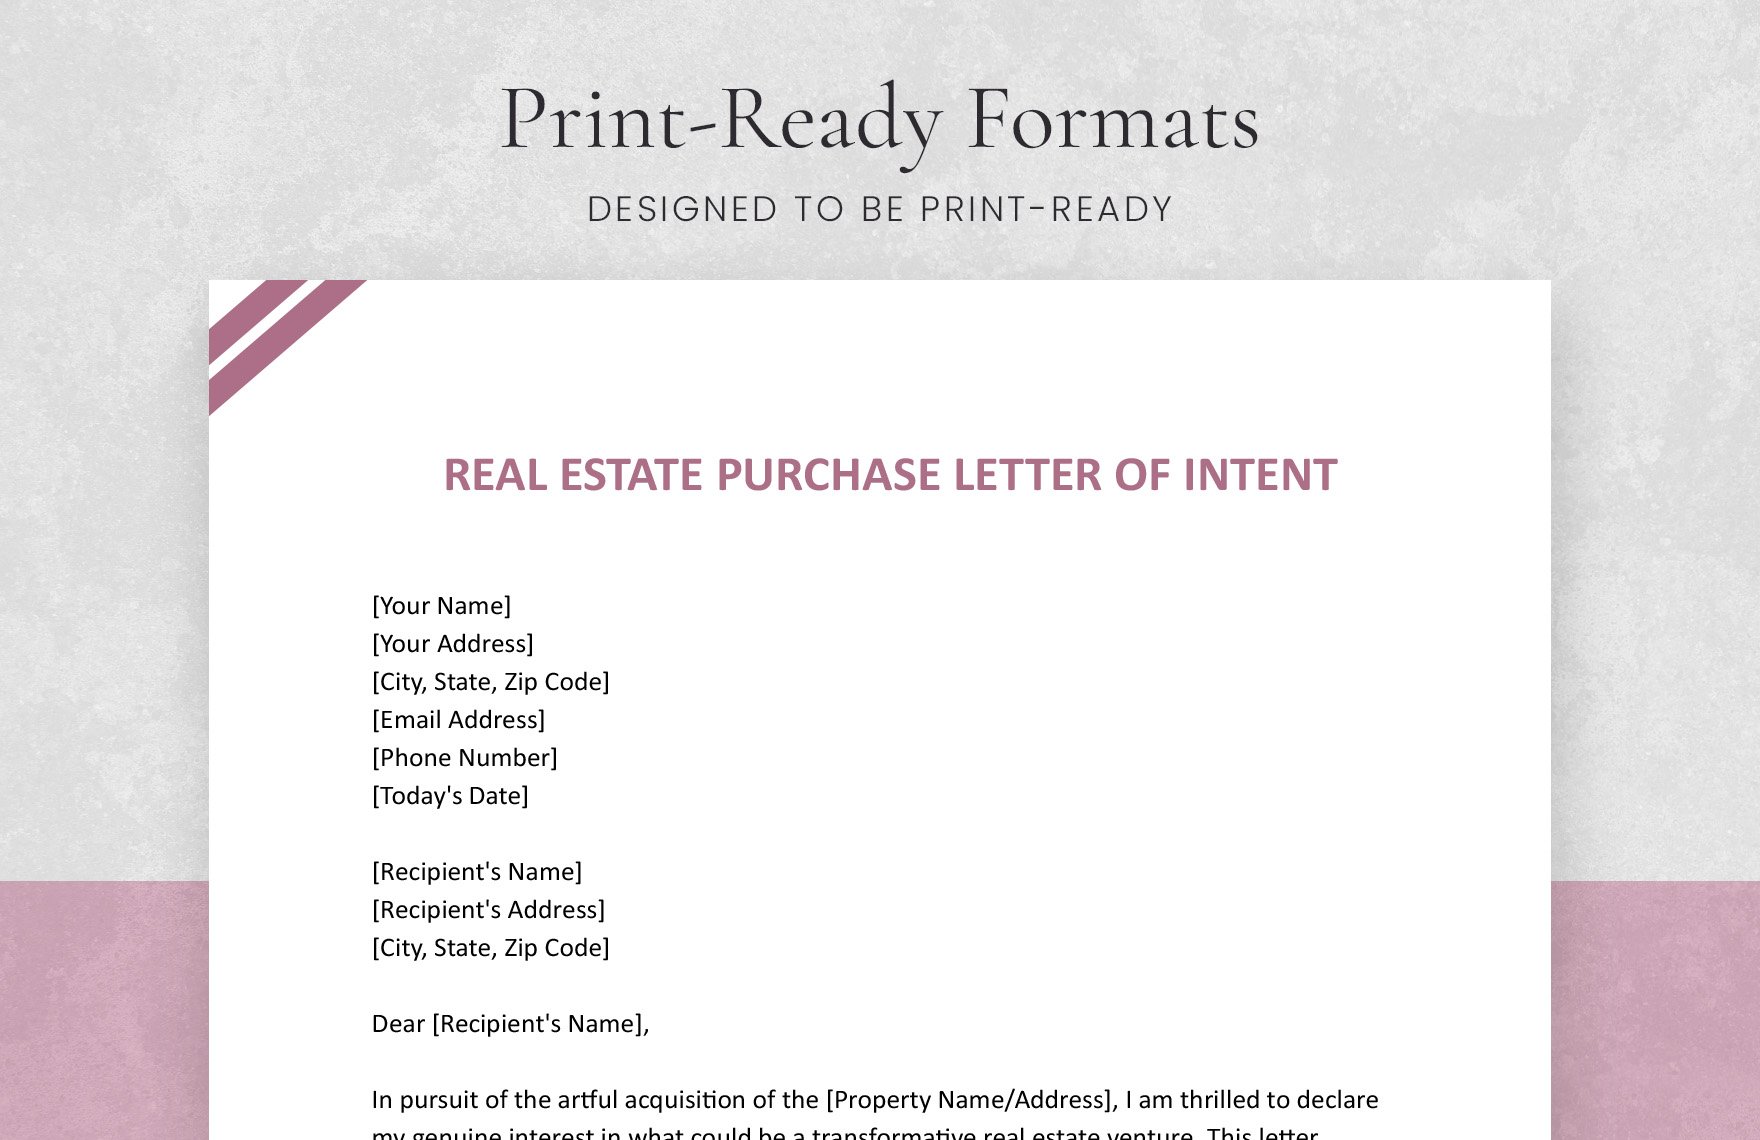 Real Estate Purchase Letter Of Intent